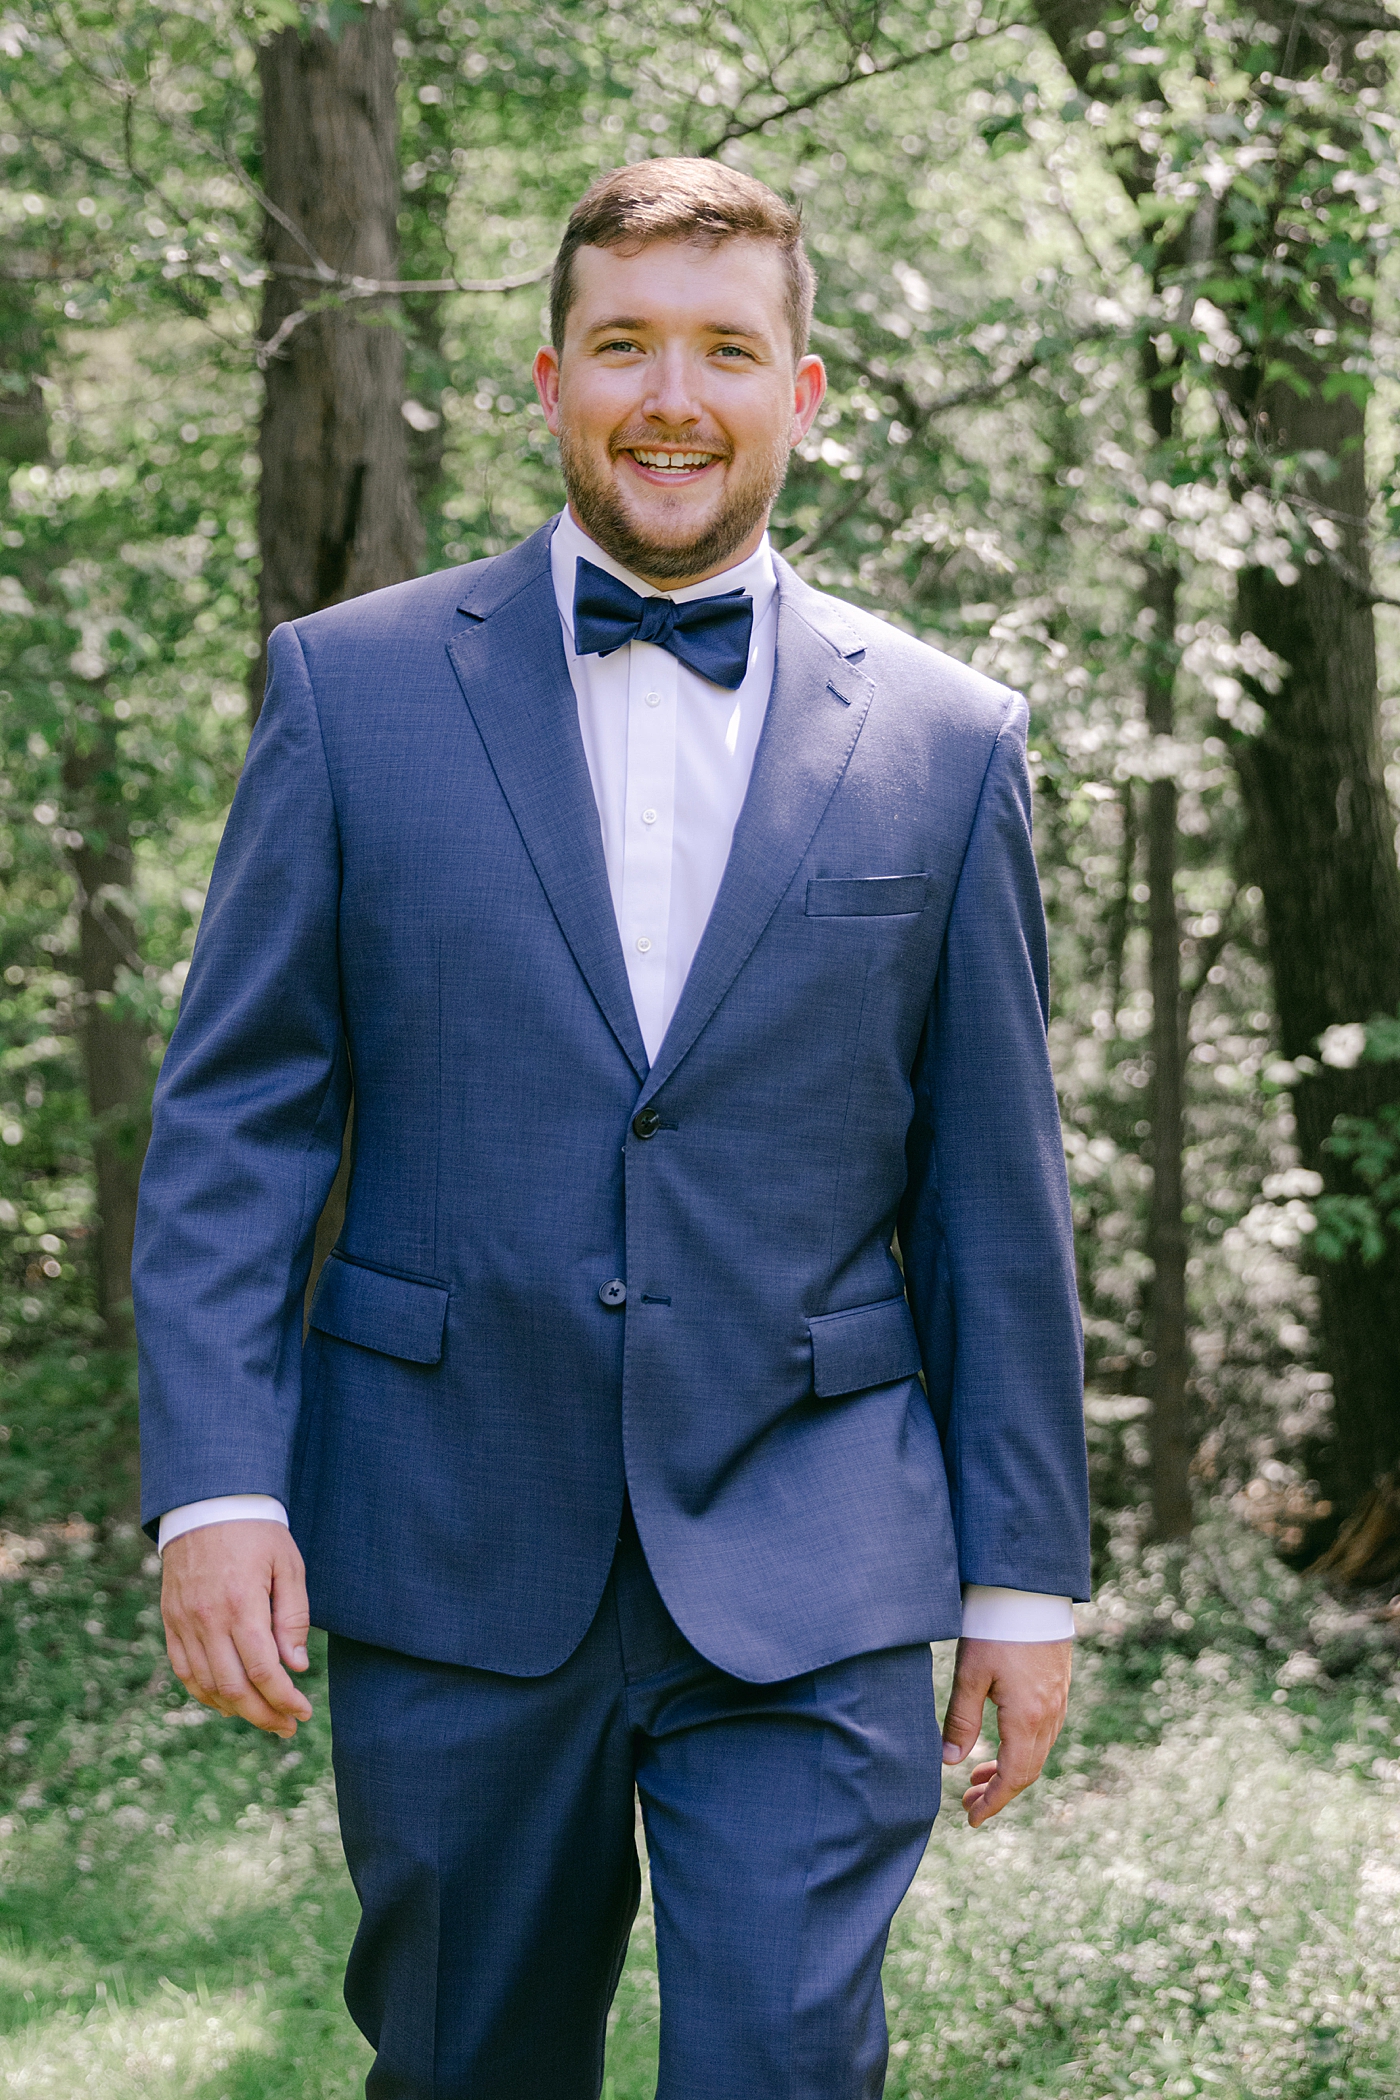 Groom smiling | Image by Hope Helmuth Photography